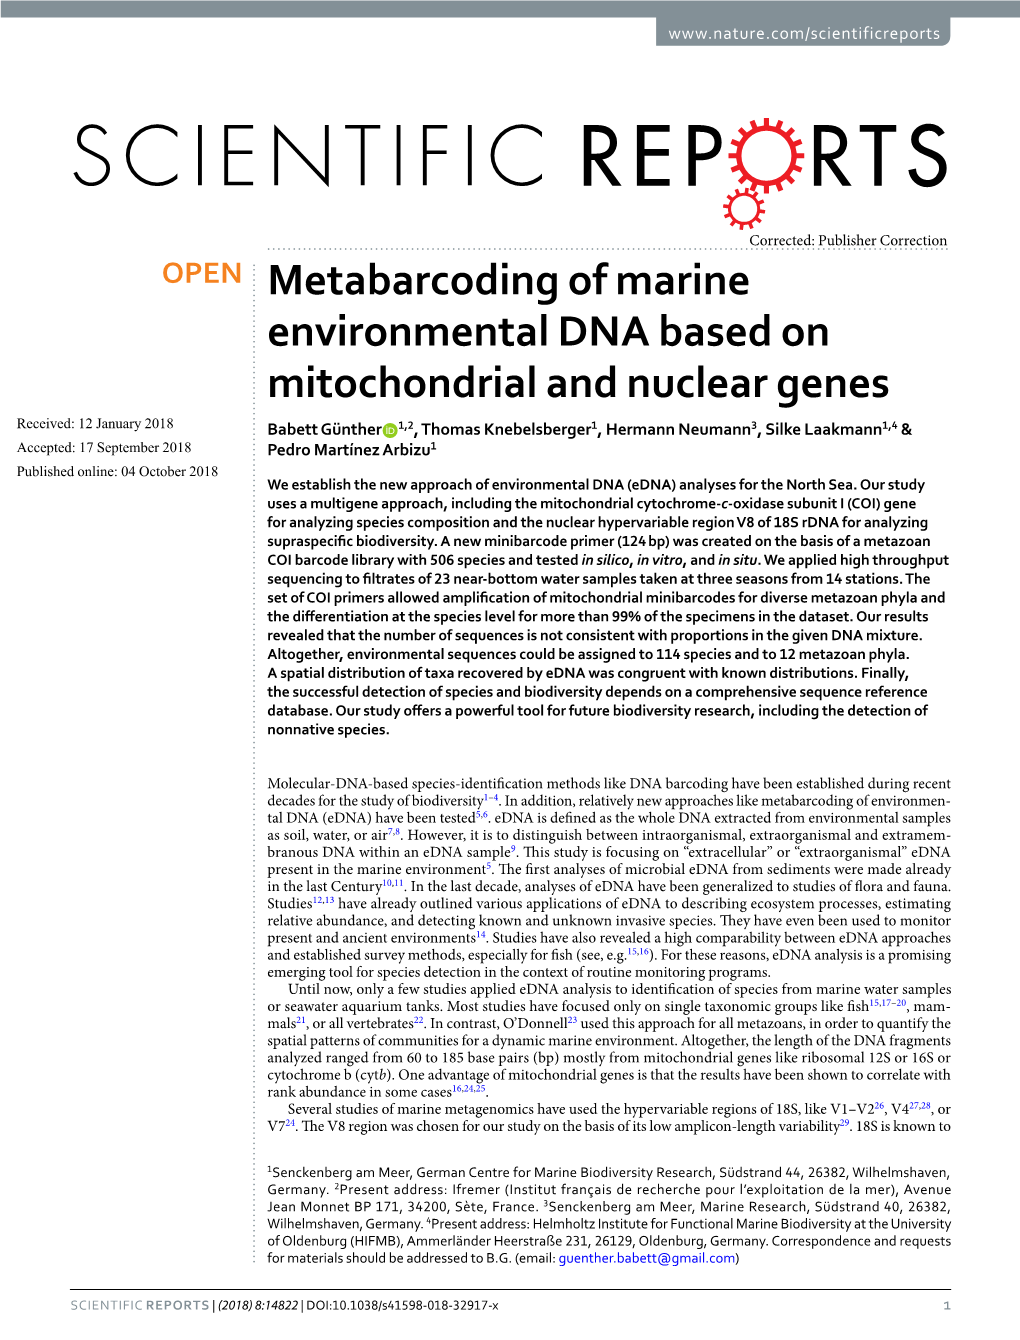 Metabarcoding of Marine Environmental DNA Based On